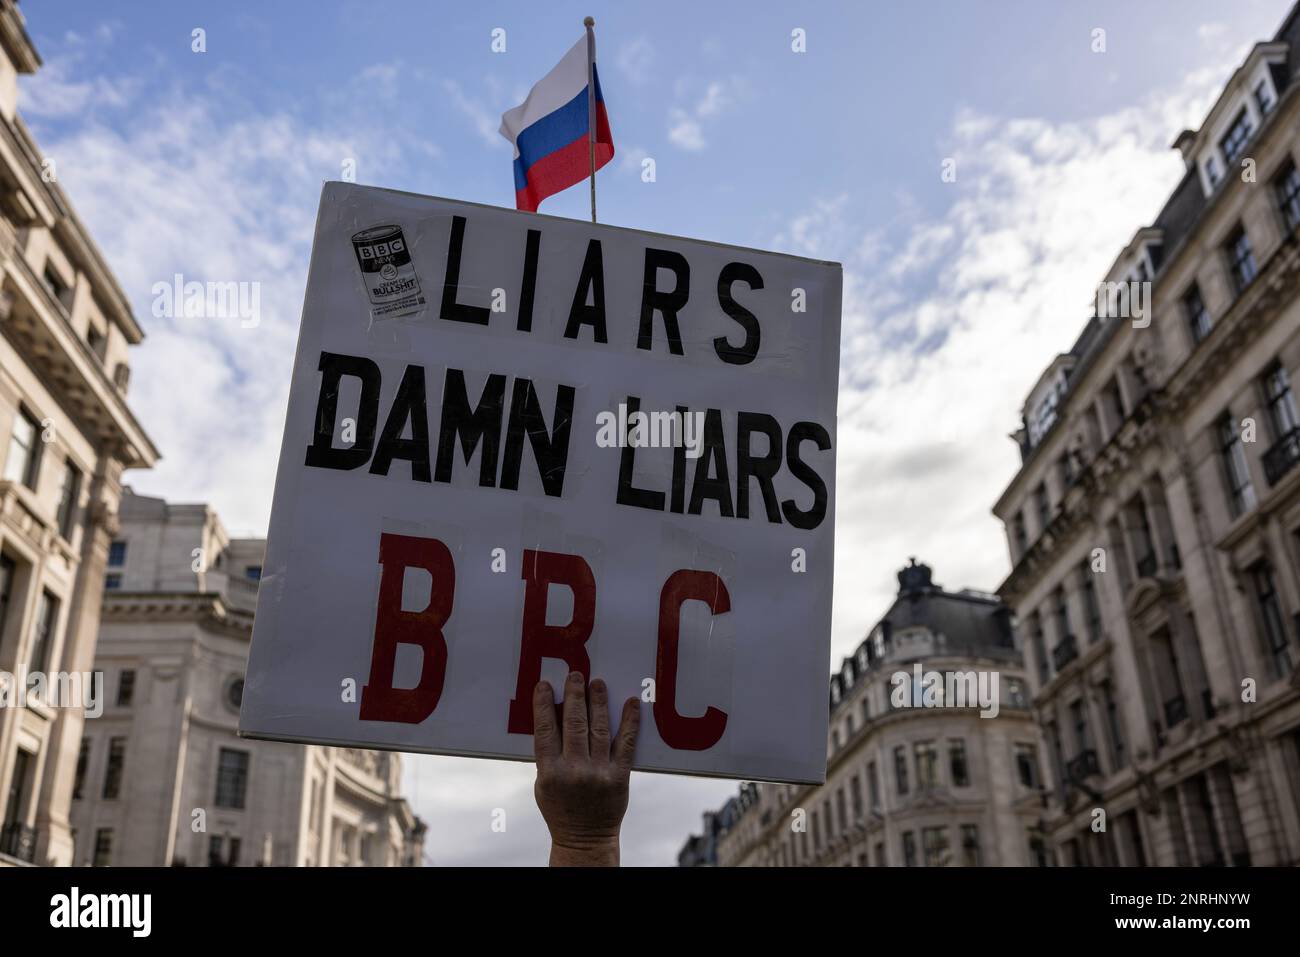 Placard calling BBC (British Broadcasting Corporation) owned by the British Government liars, central London, England, United Kingdom Stock Photo